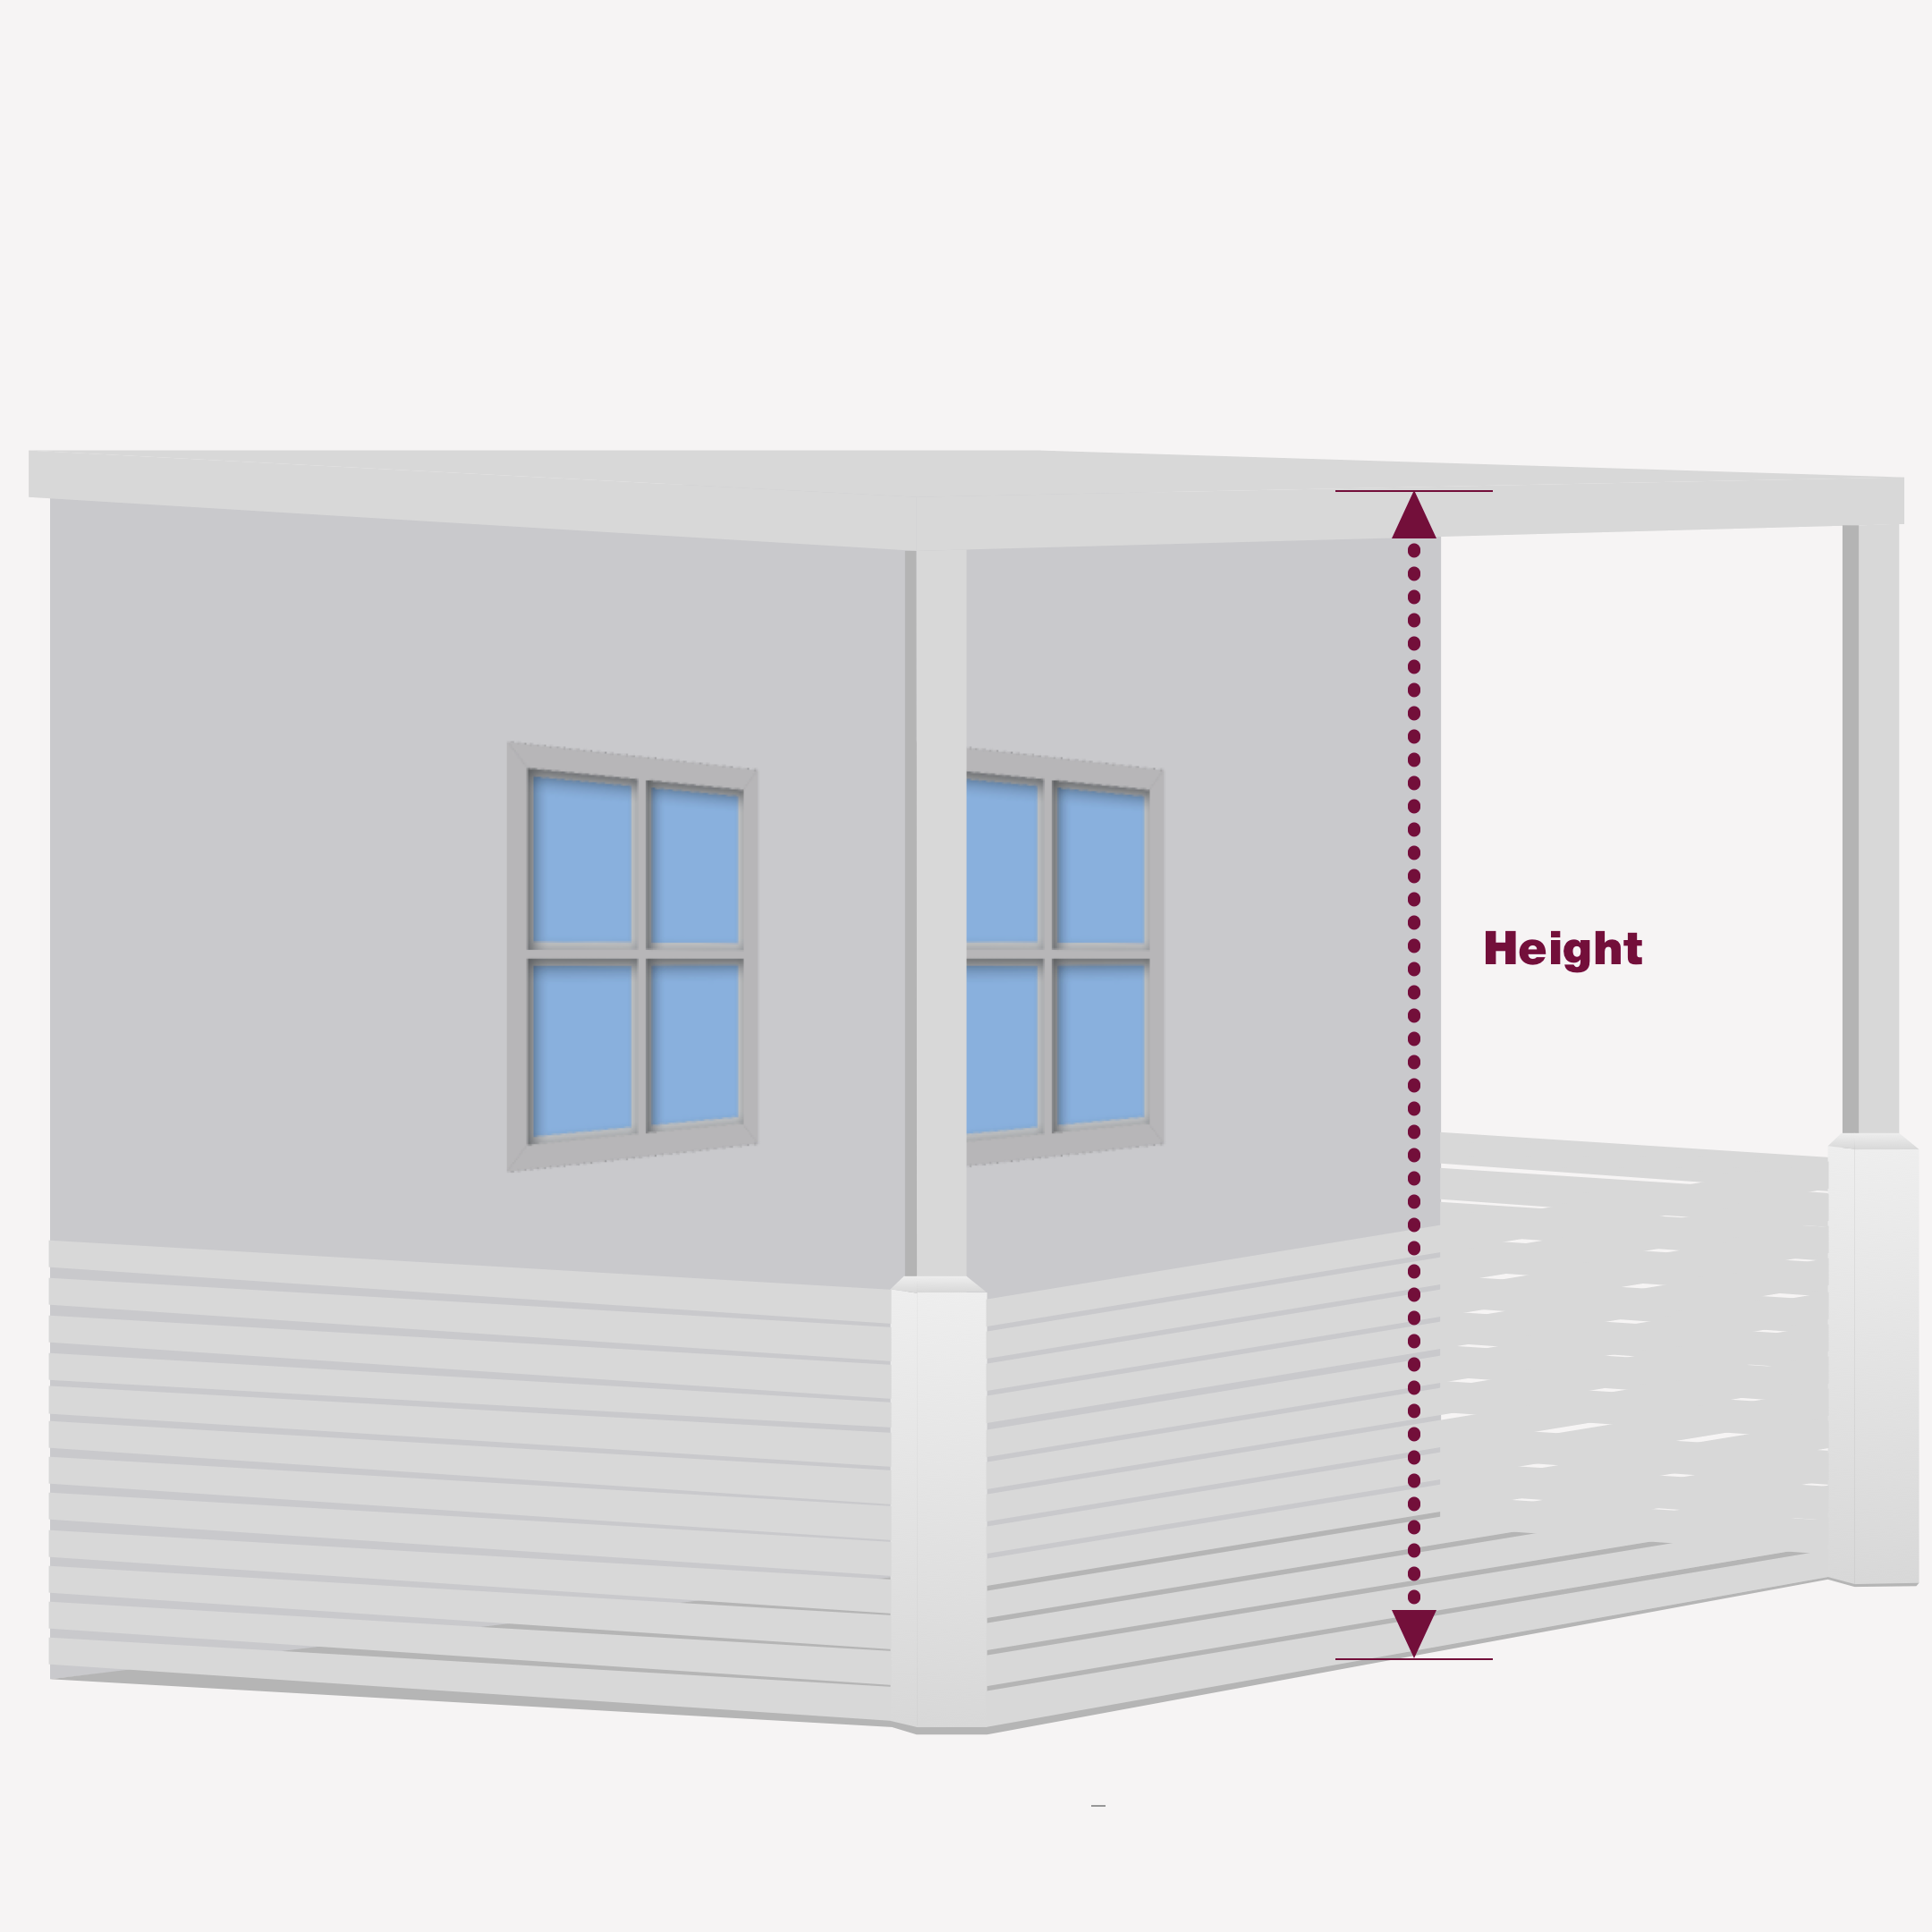 Measuring Height  for post installation of Exterior Auto Awning